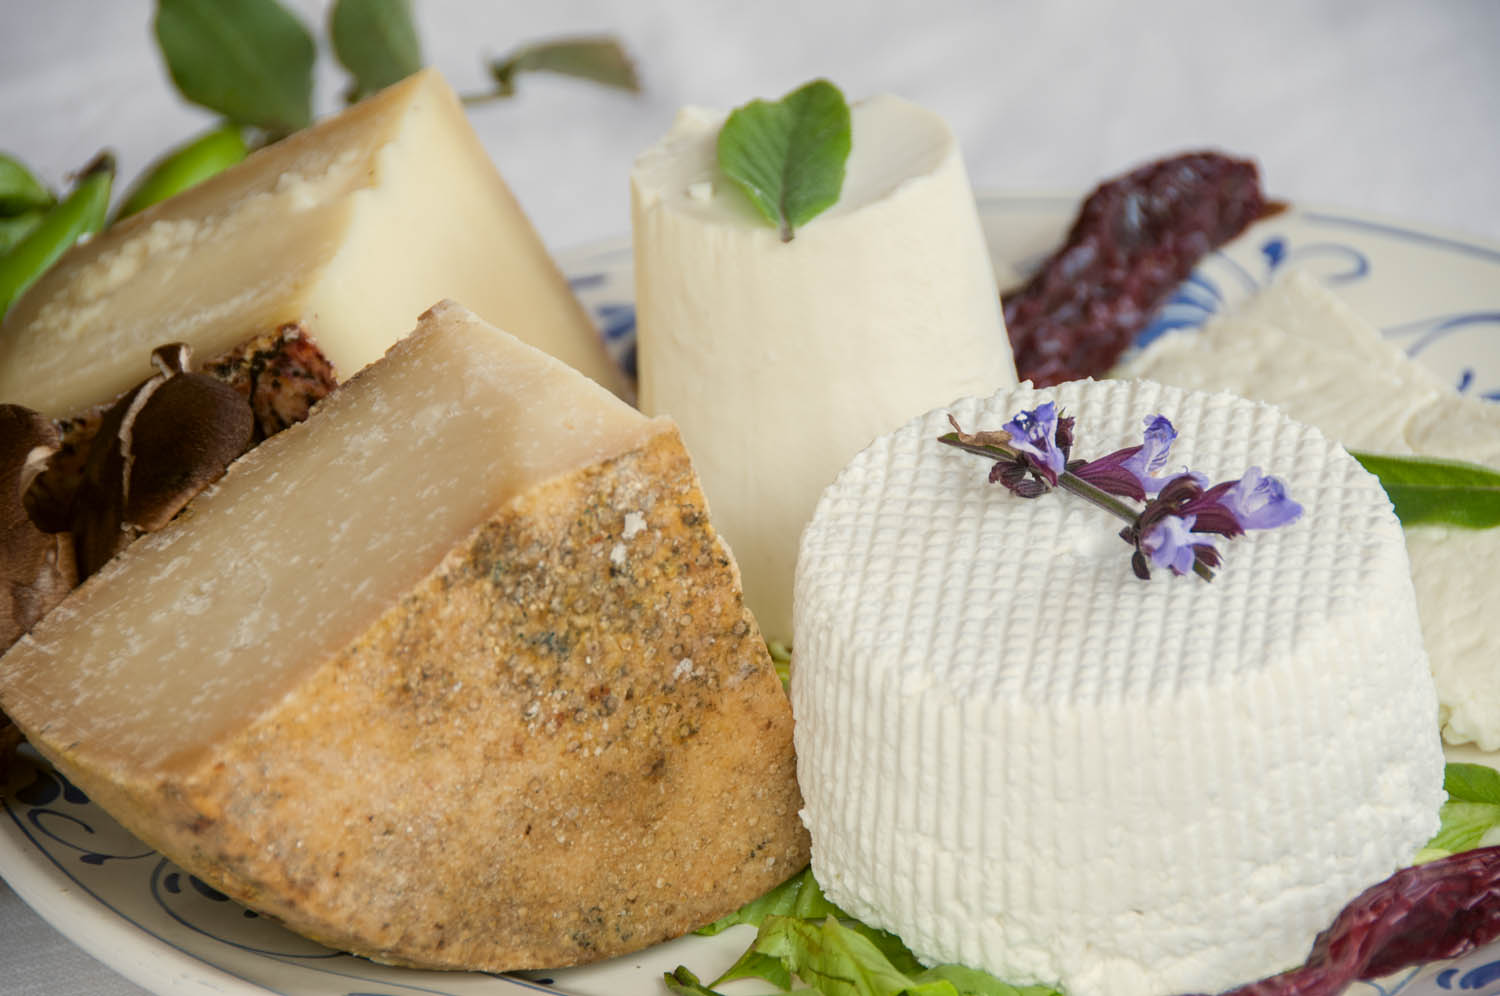 Fiorito cheesemakers, typical products